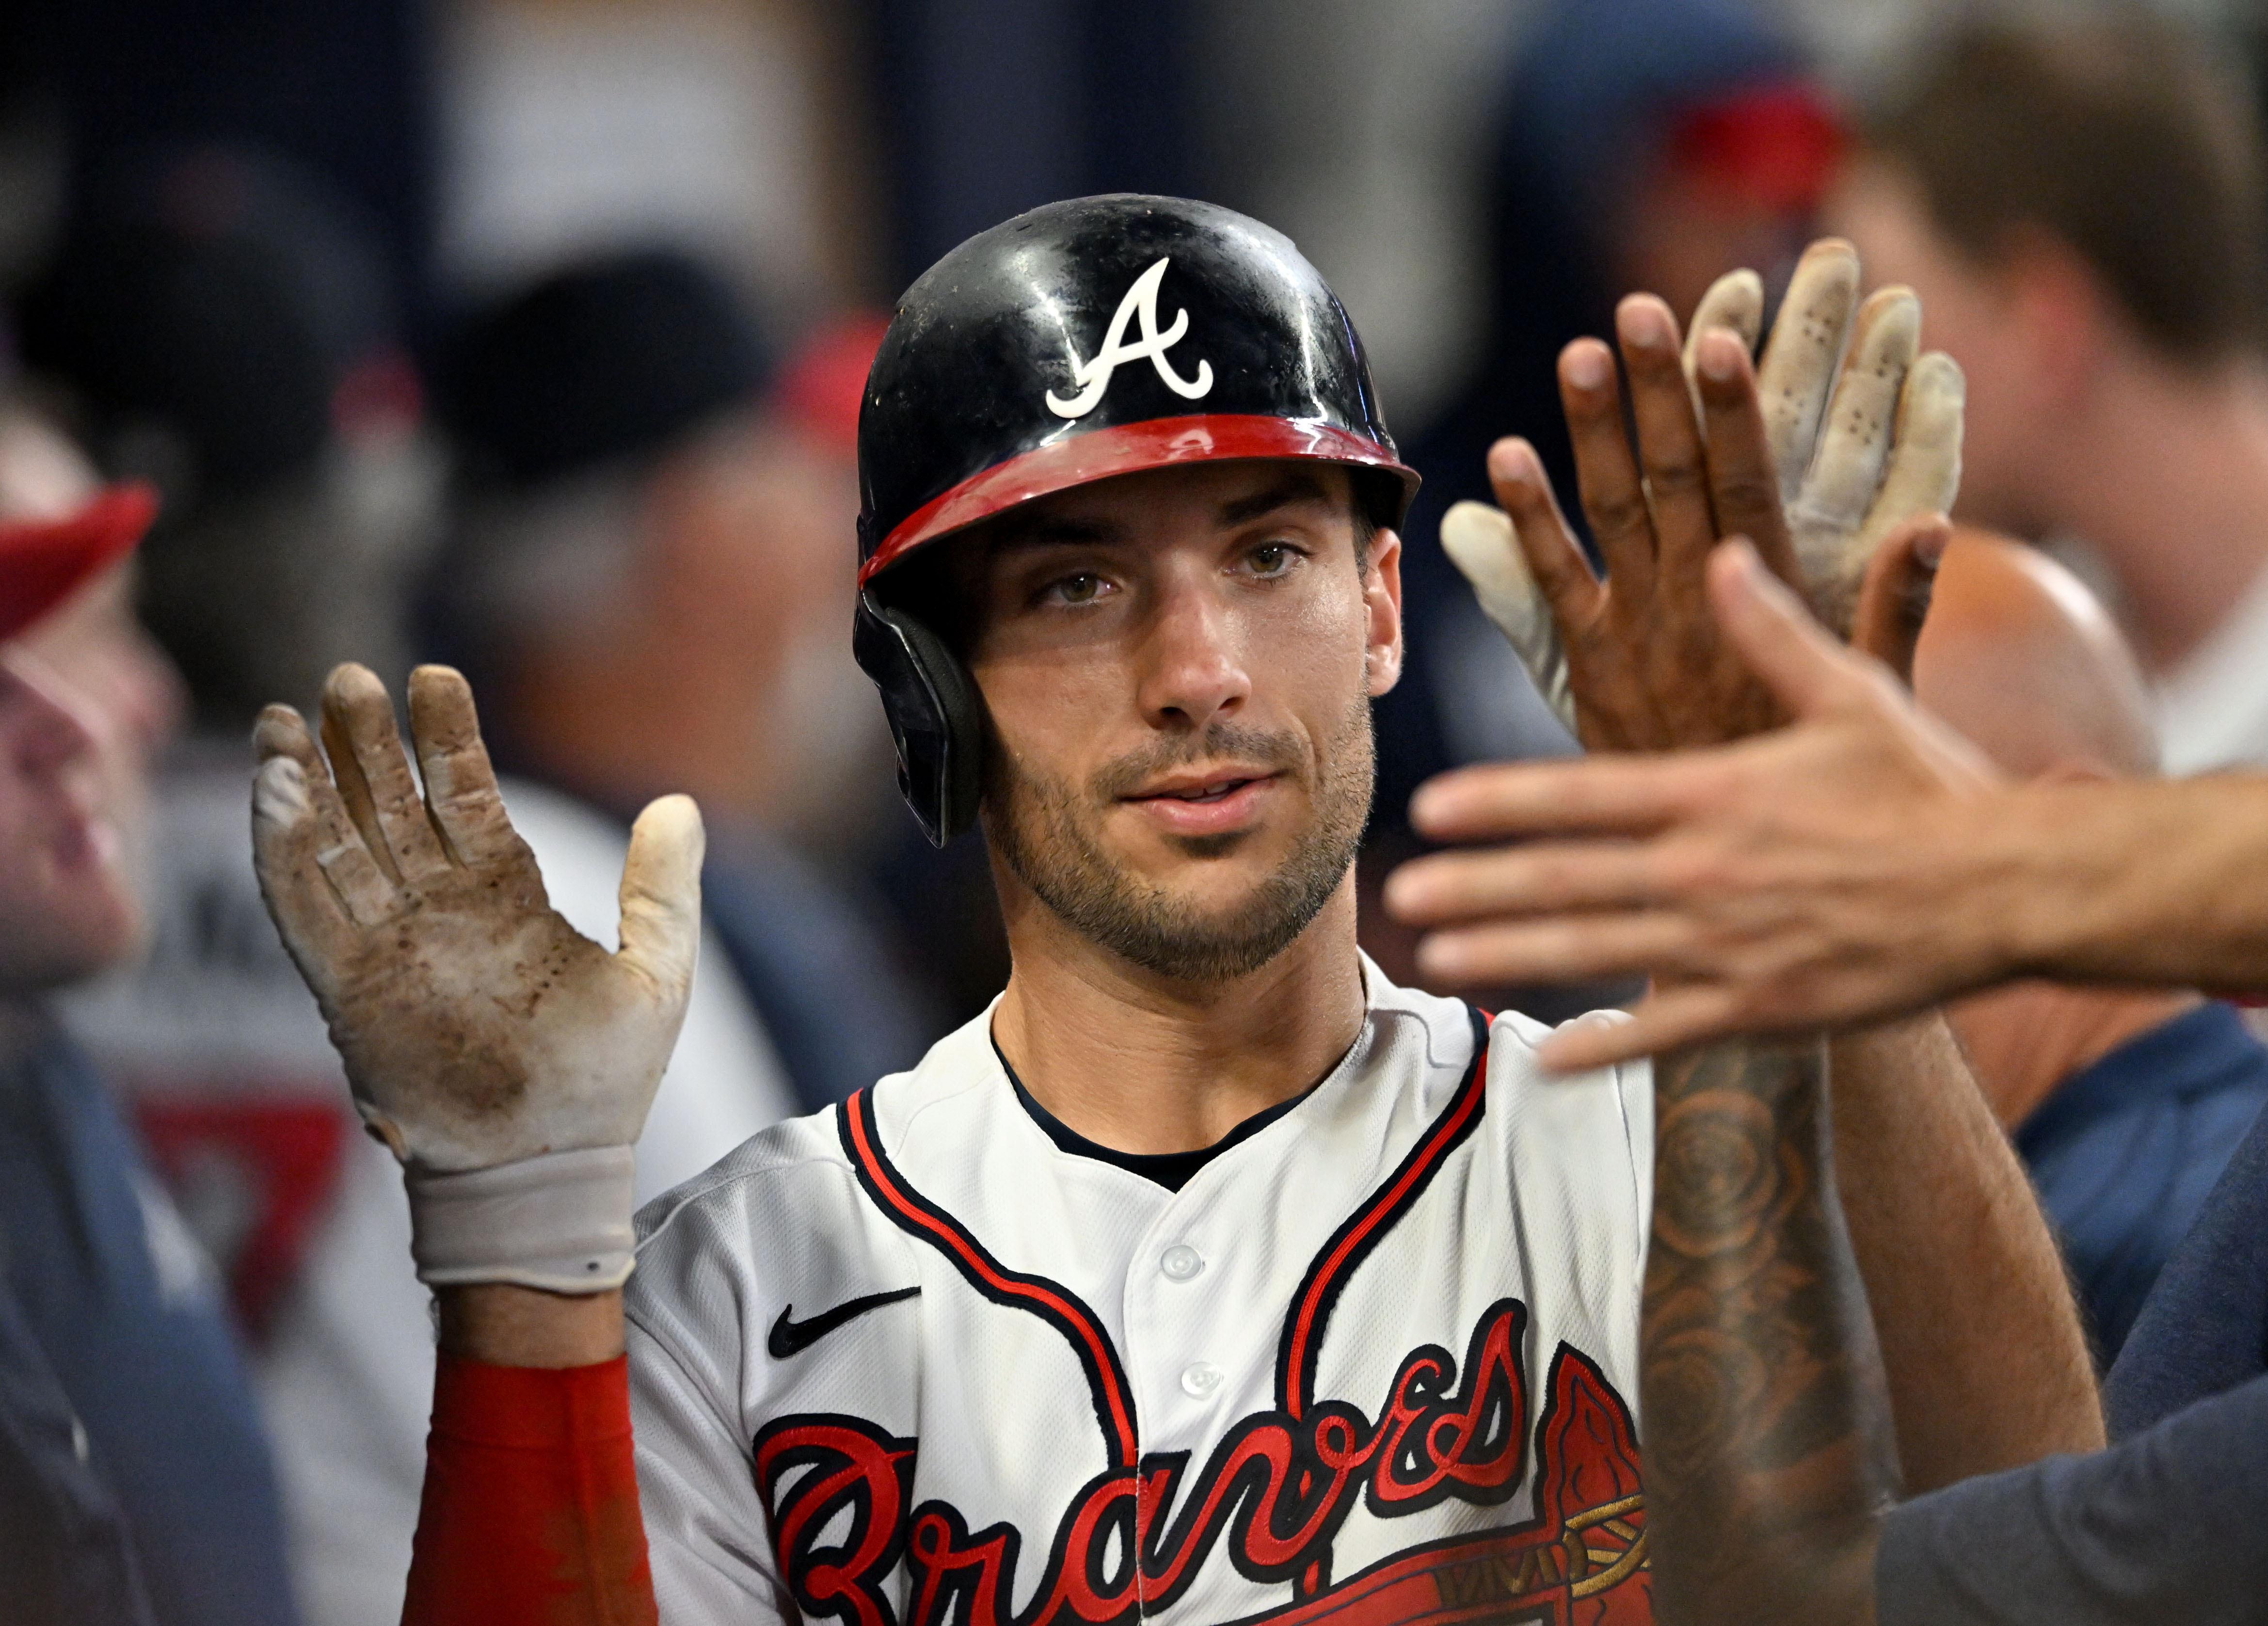 This Day in Braves History: Javy Lopez and Andruw Jones go back-to